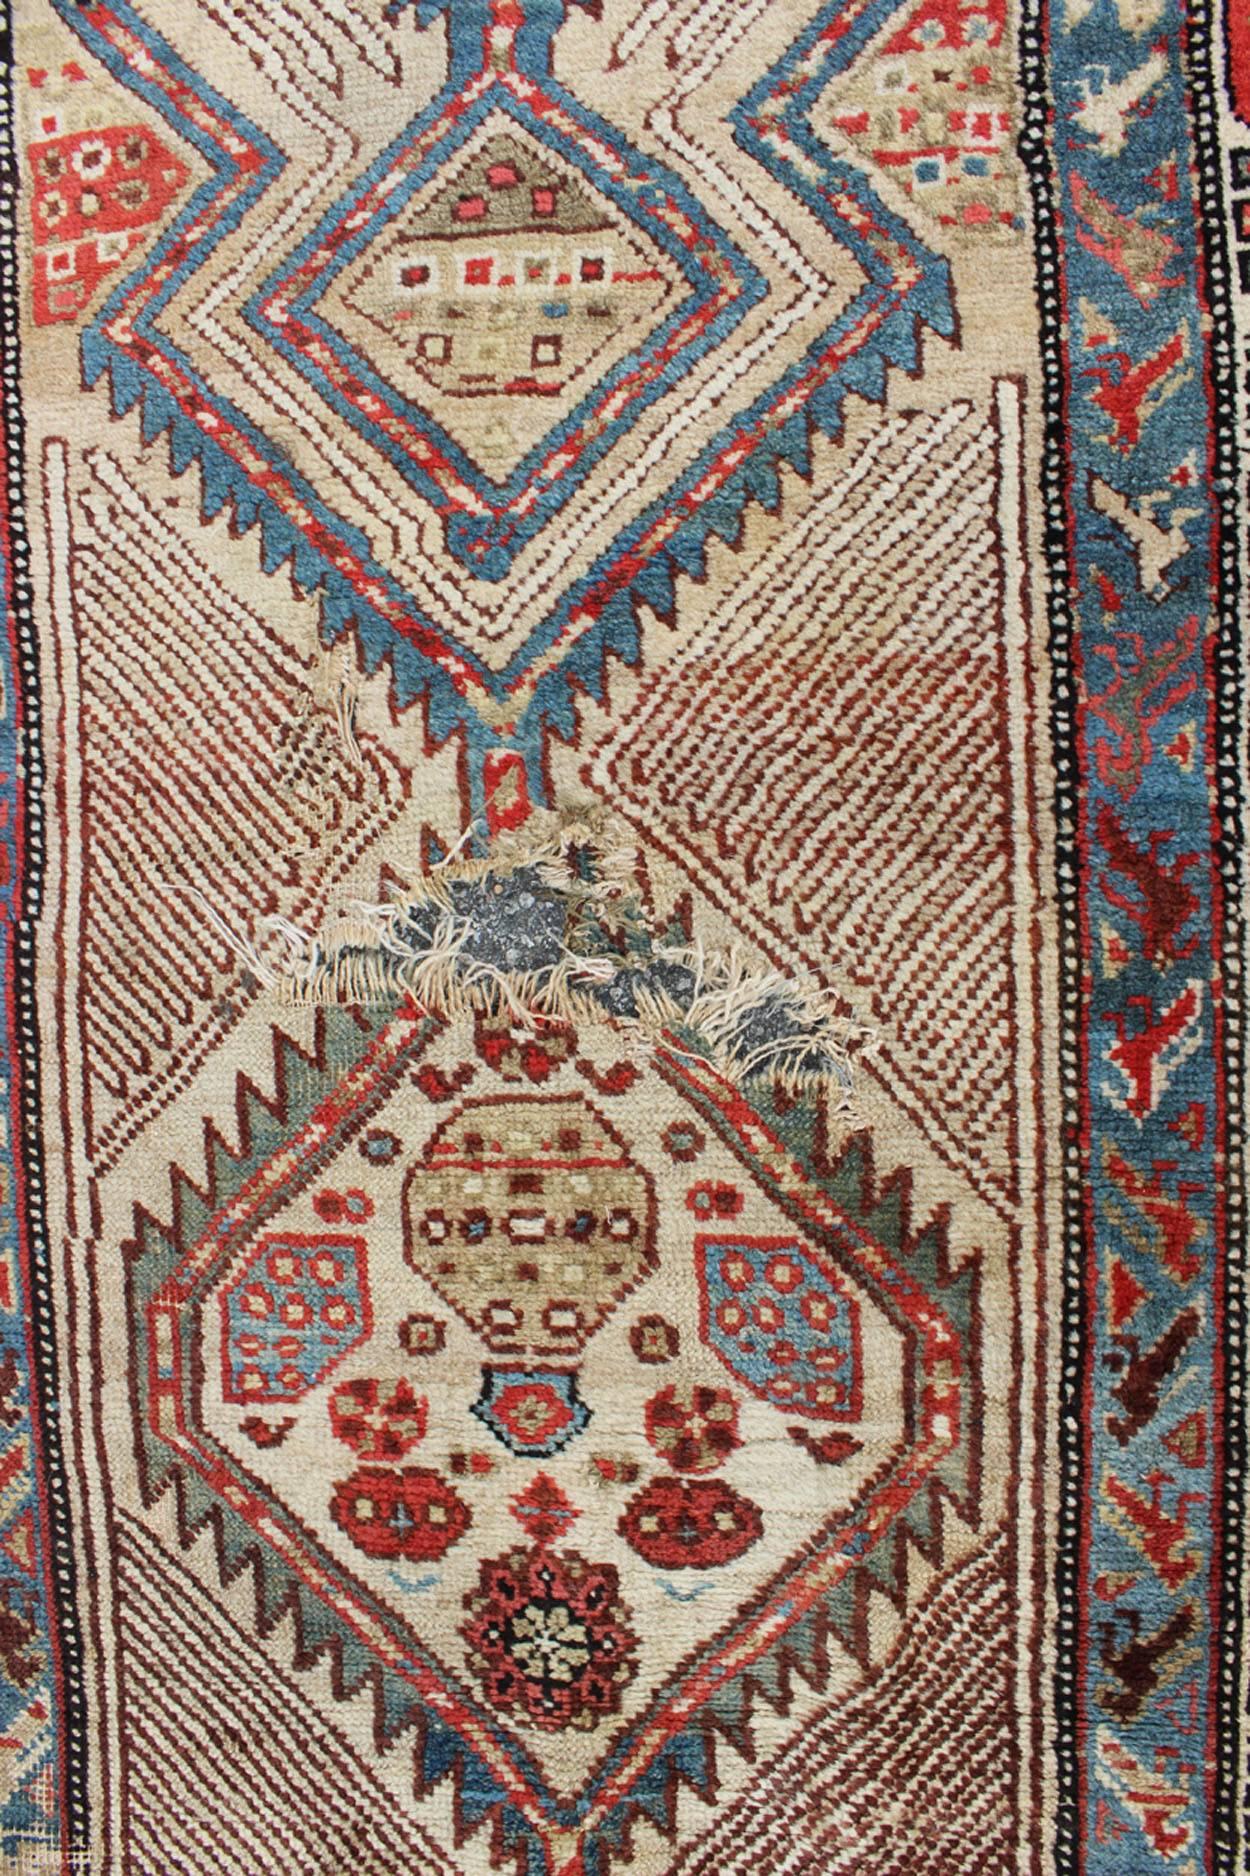 Tribal Mid-19th Century Antique Serab Runner in Ivory, Blue and Red